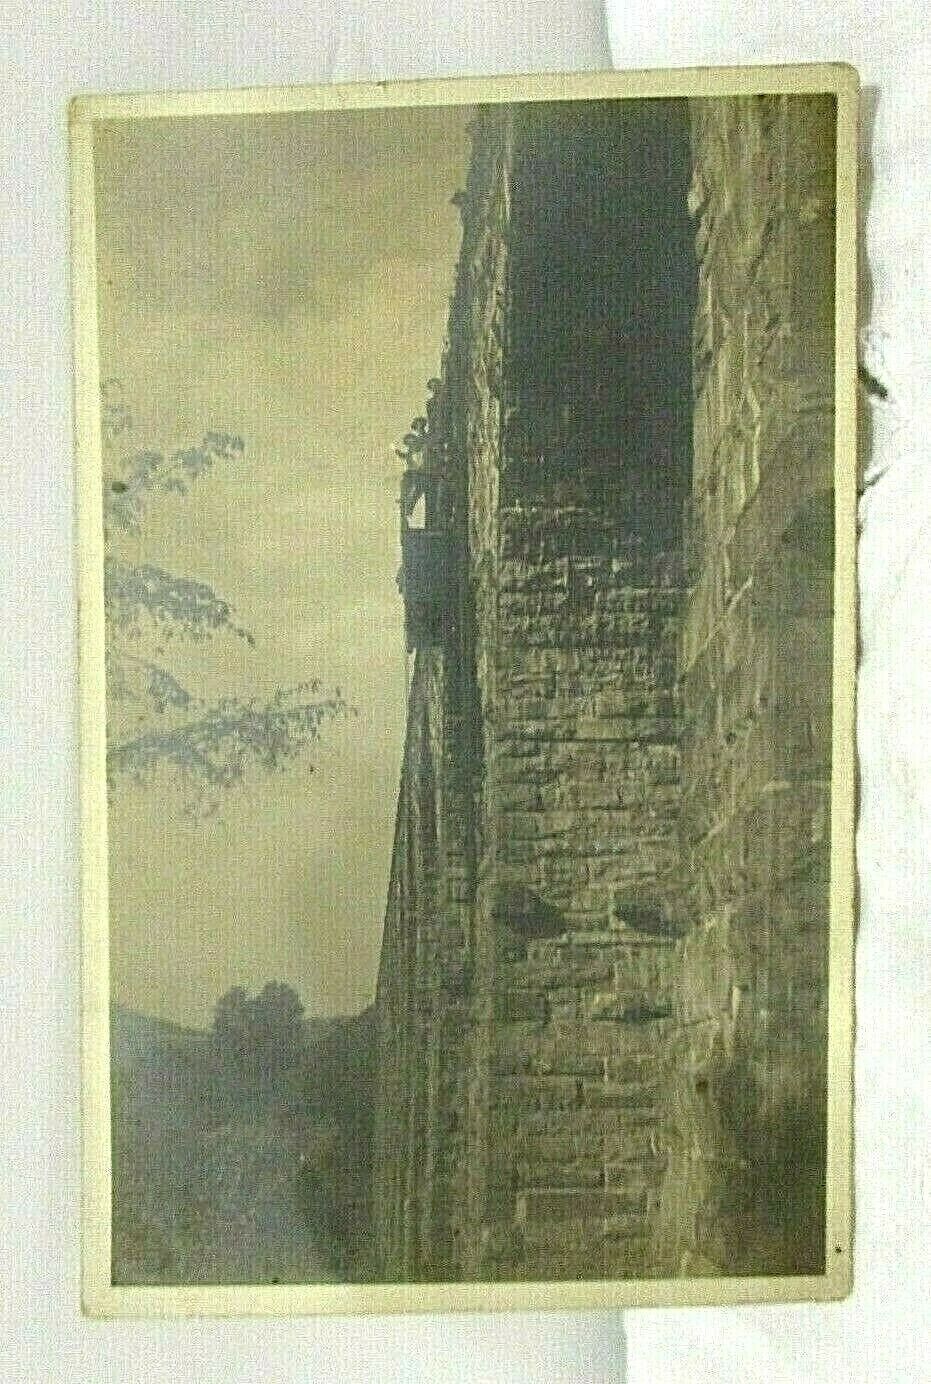 RPPC Real Photo Postcard 1915-1930 Unknown Place 3 Men Up High Elevator?